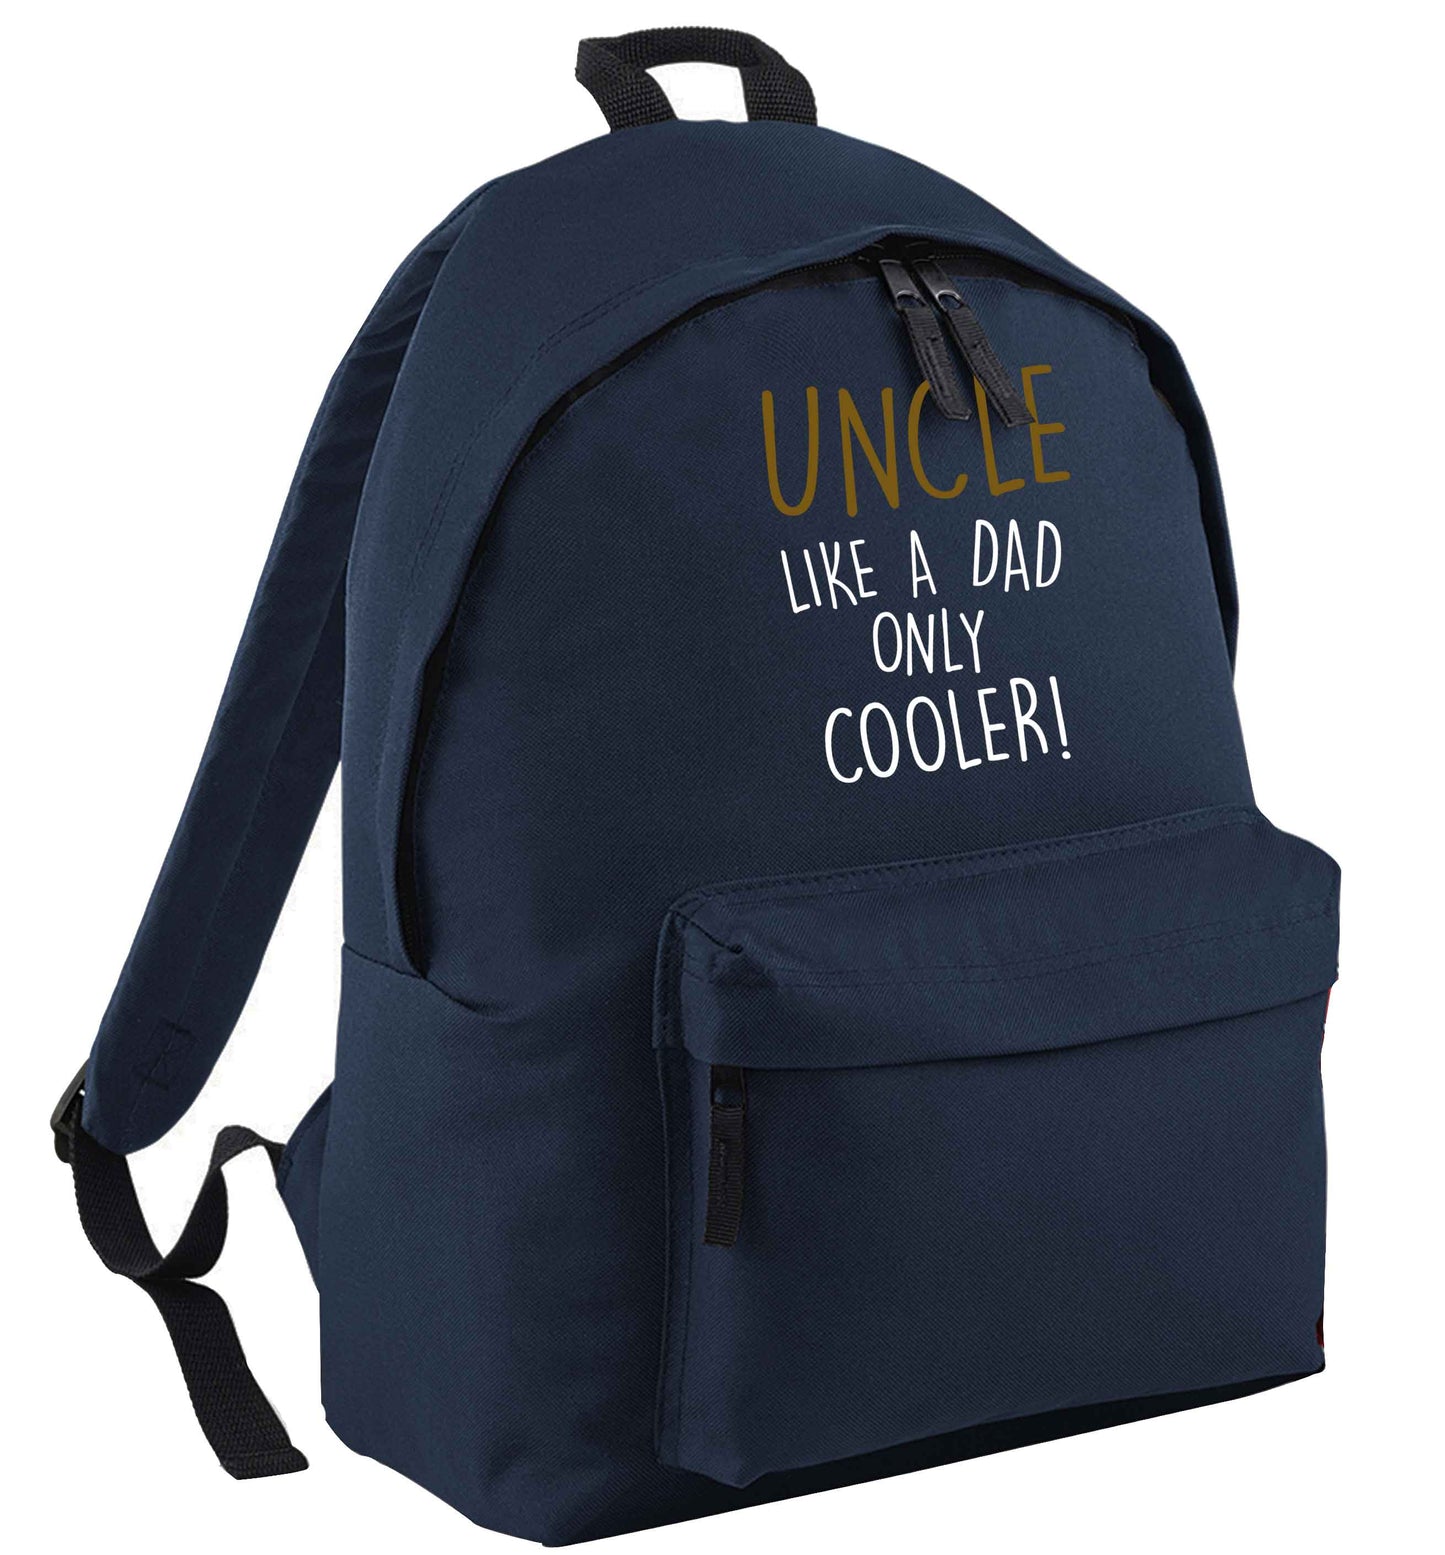 Uncle like a dad only cooler | Children's backpack